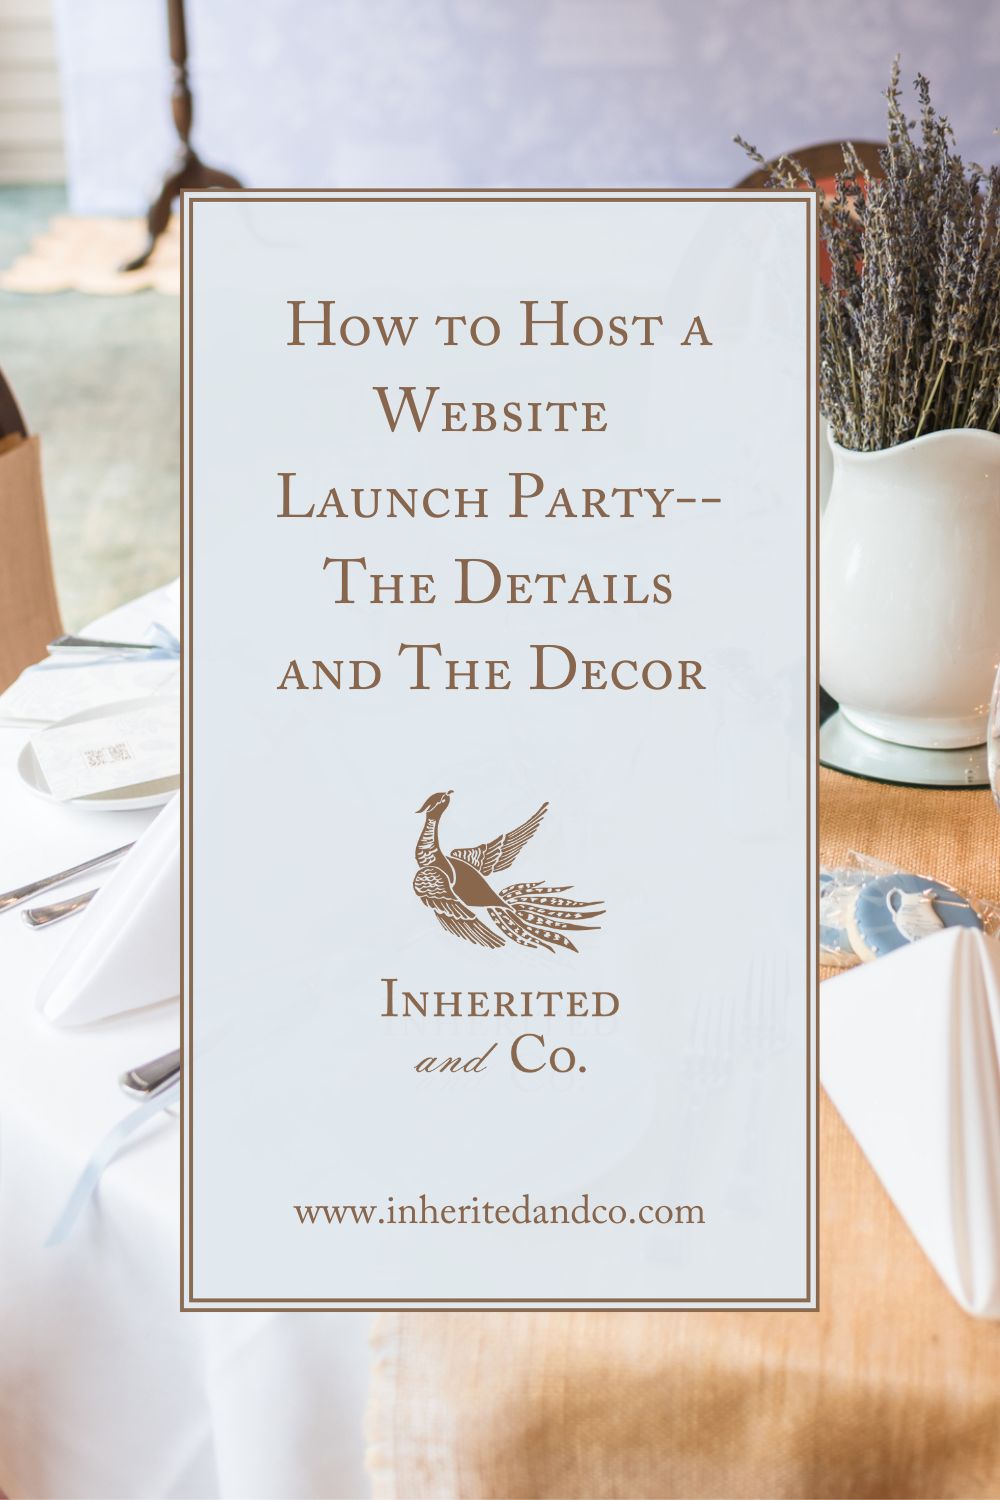 "How to Host a Website Launch Party--The Details and The Decor"